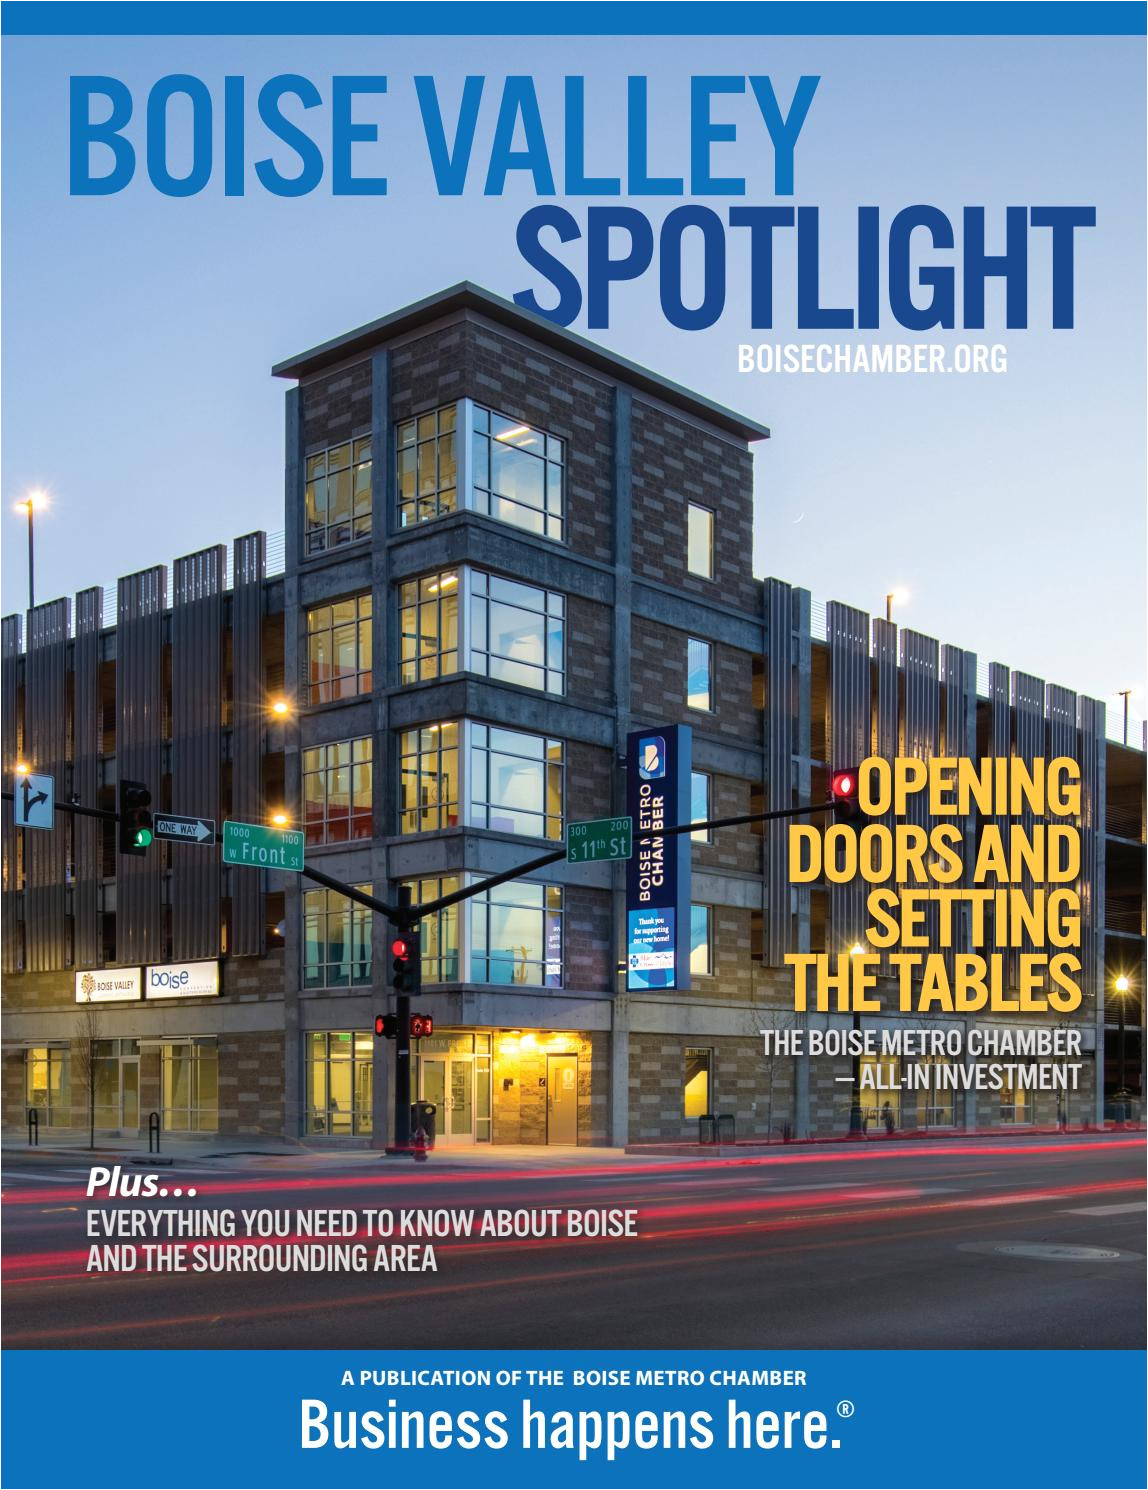 Huntington Hills Superstore Click and Collect 2018 Boise Valley Spotlight Magazine by Boise Metro Chamber issuu